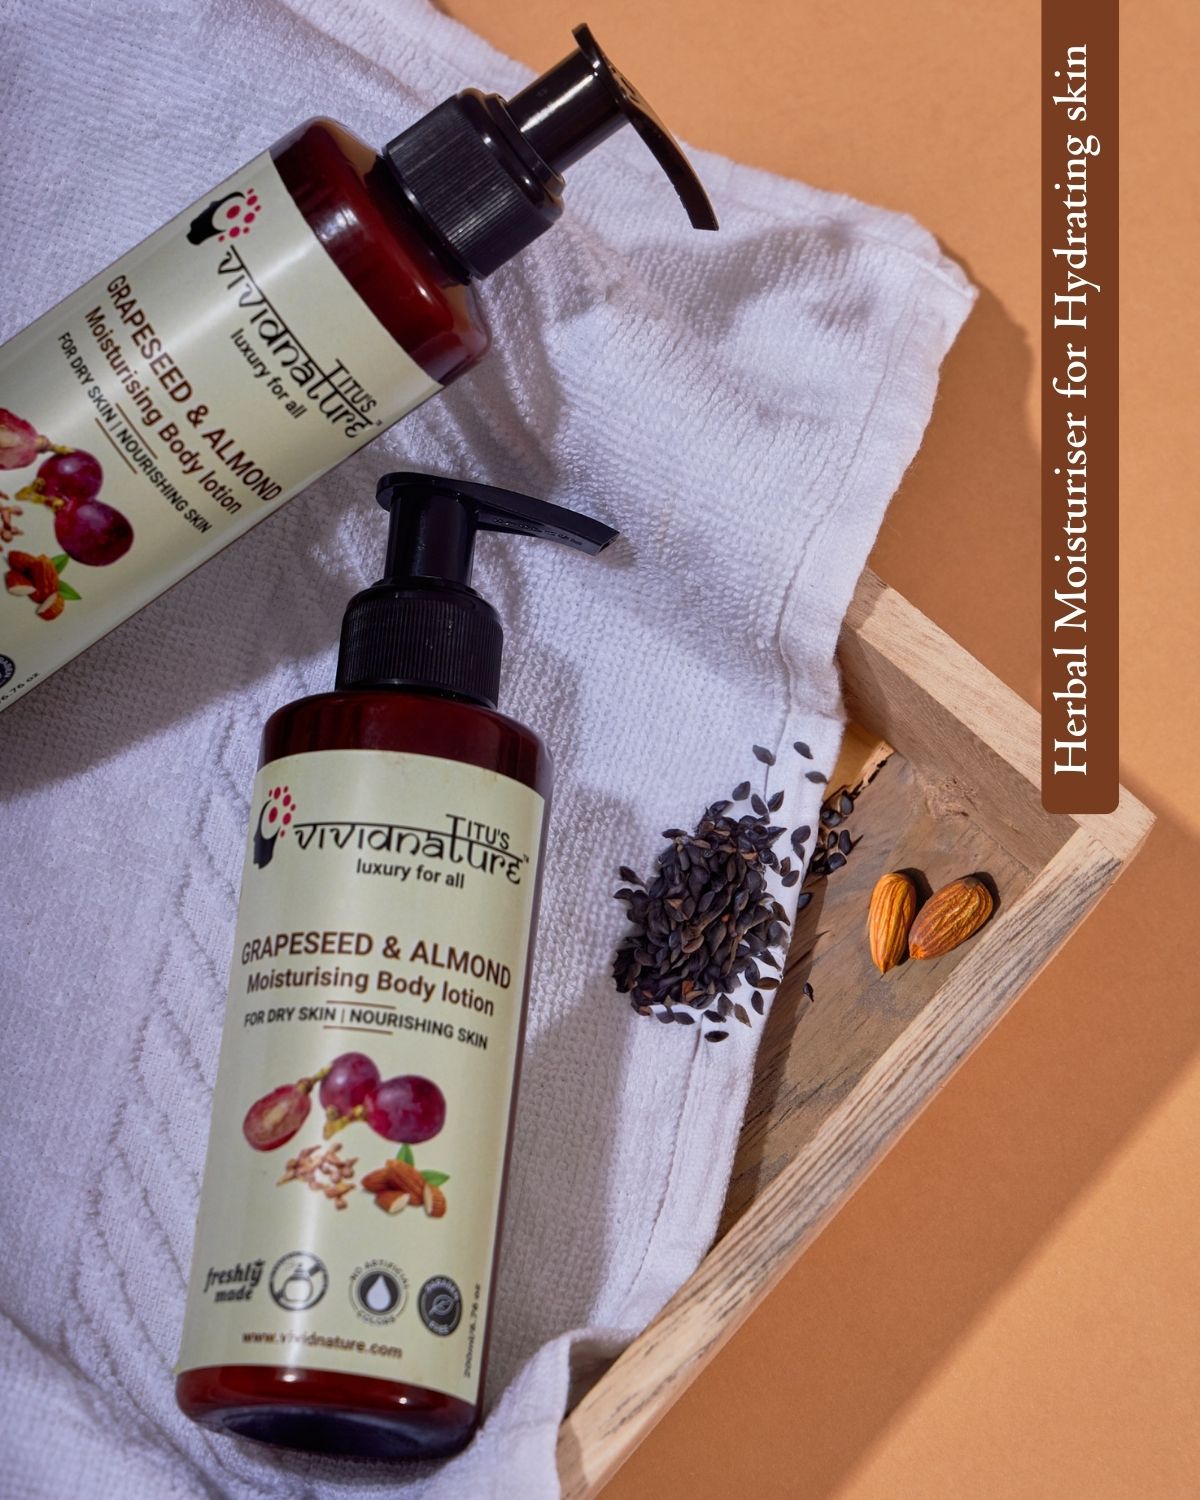 Grapeseed & Almond Body Lotion